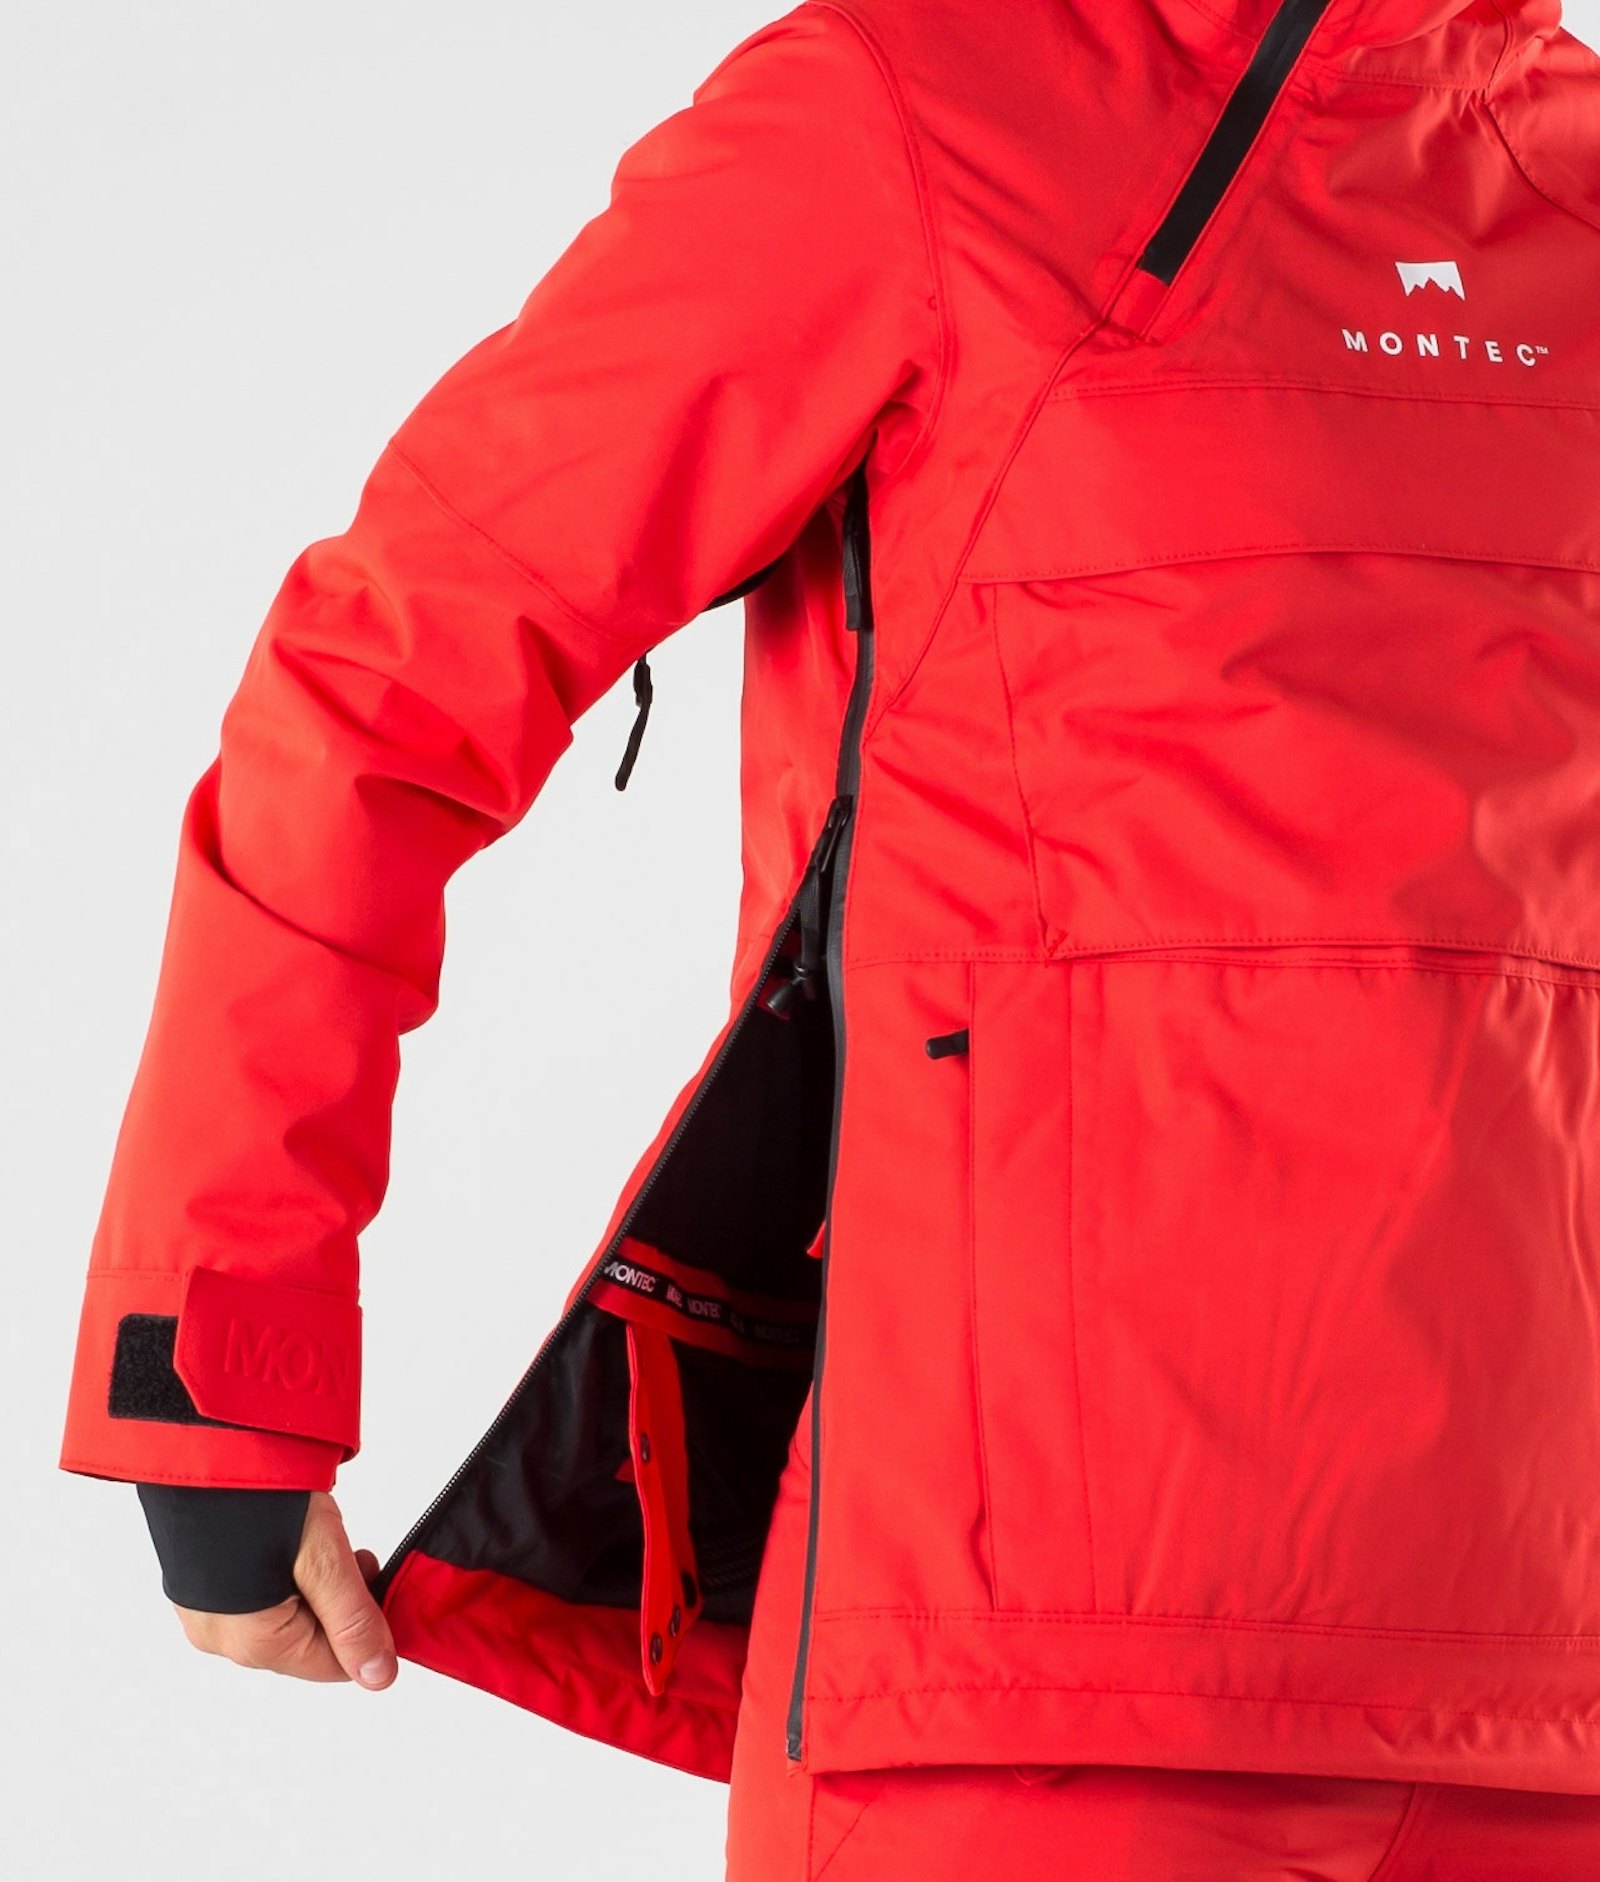 Montec Dune W 2019 Giacca Snowboard Donna Red